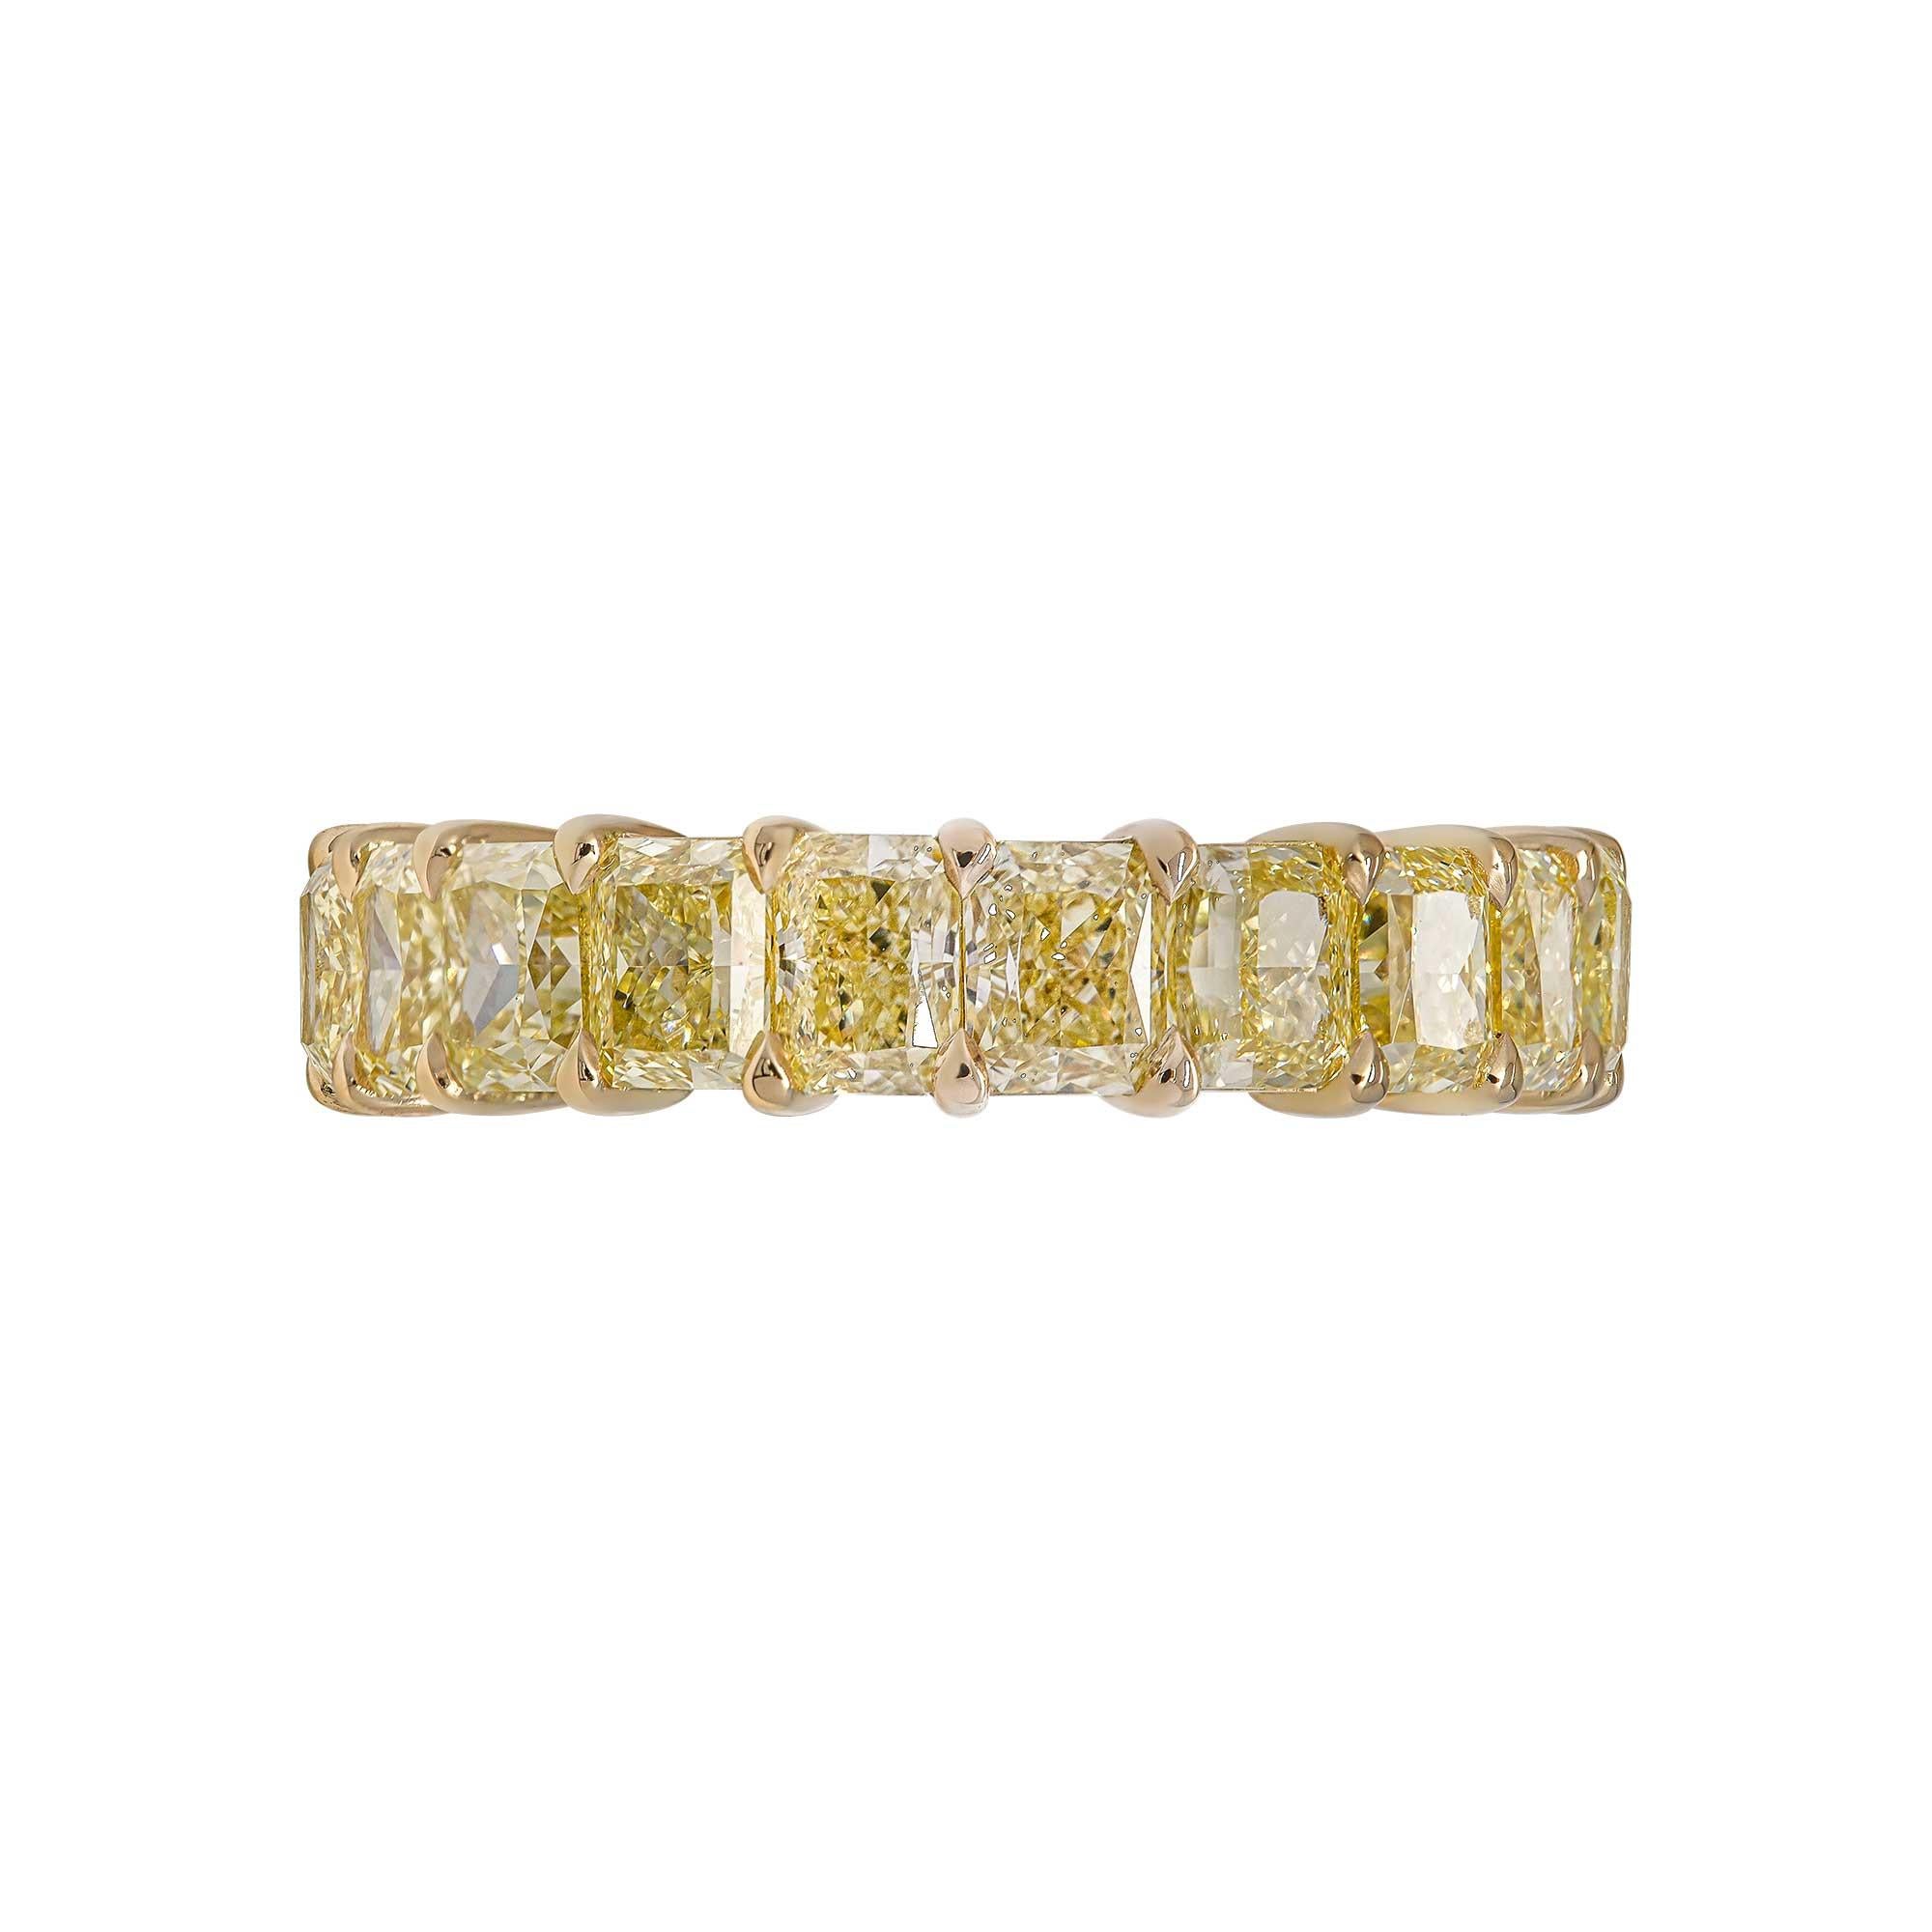 The most wanted piece of jewelry in 2021, timeless, edgy, and stylish!
Handcrafted Band, the highest quality of mounting you will find! Delicate yet sturdy Mounted in 18K Yellow Gold, 20 Radiant cut diamonds totaling 7.12ct total, 0.35ct each